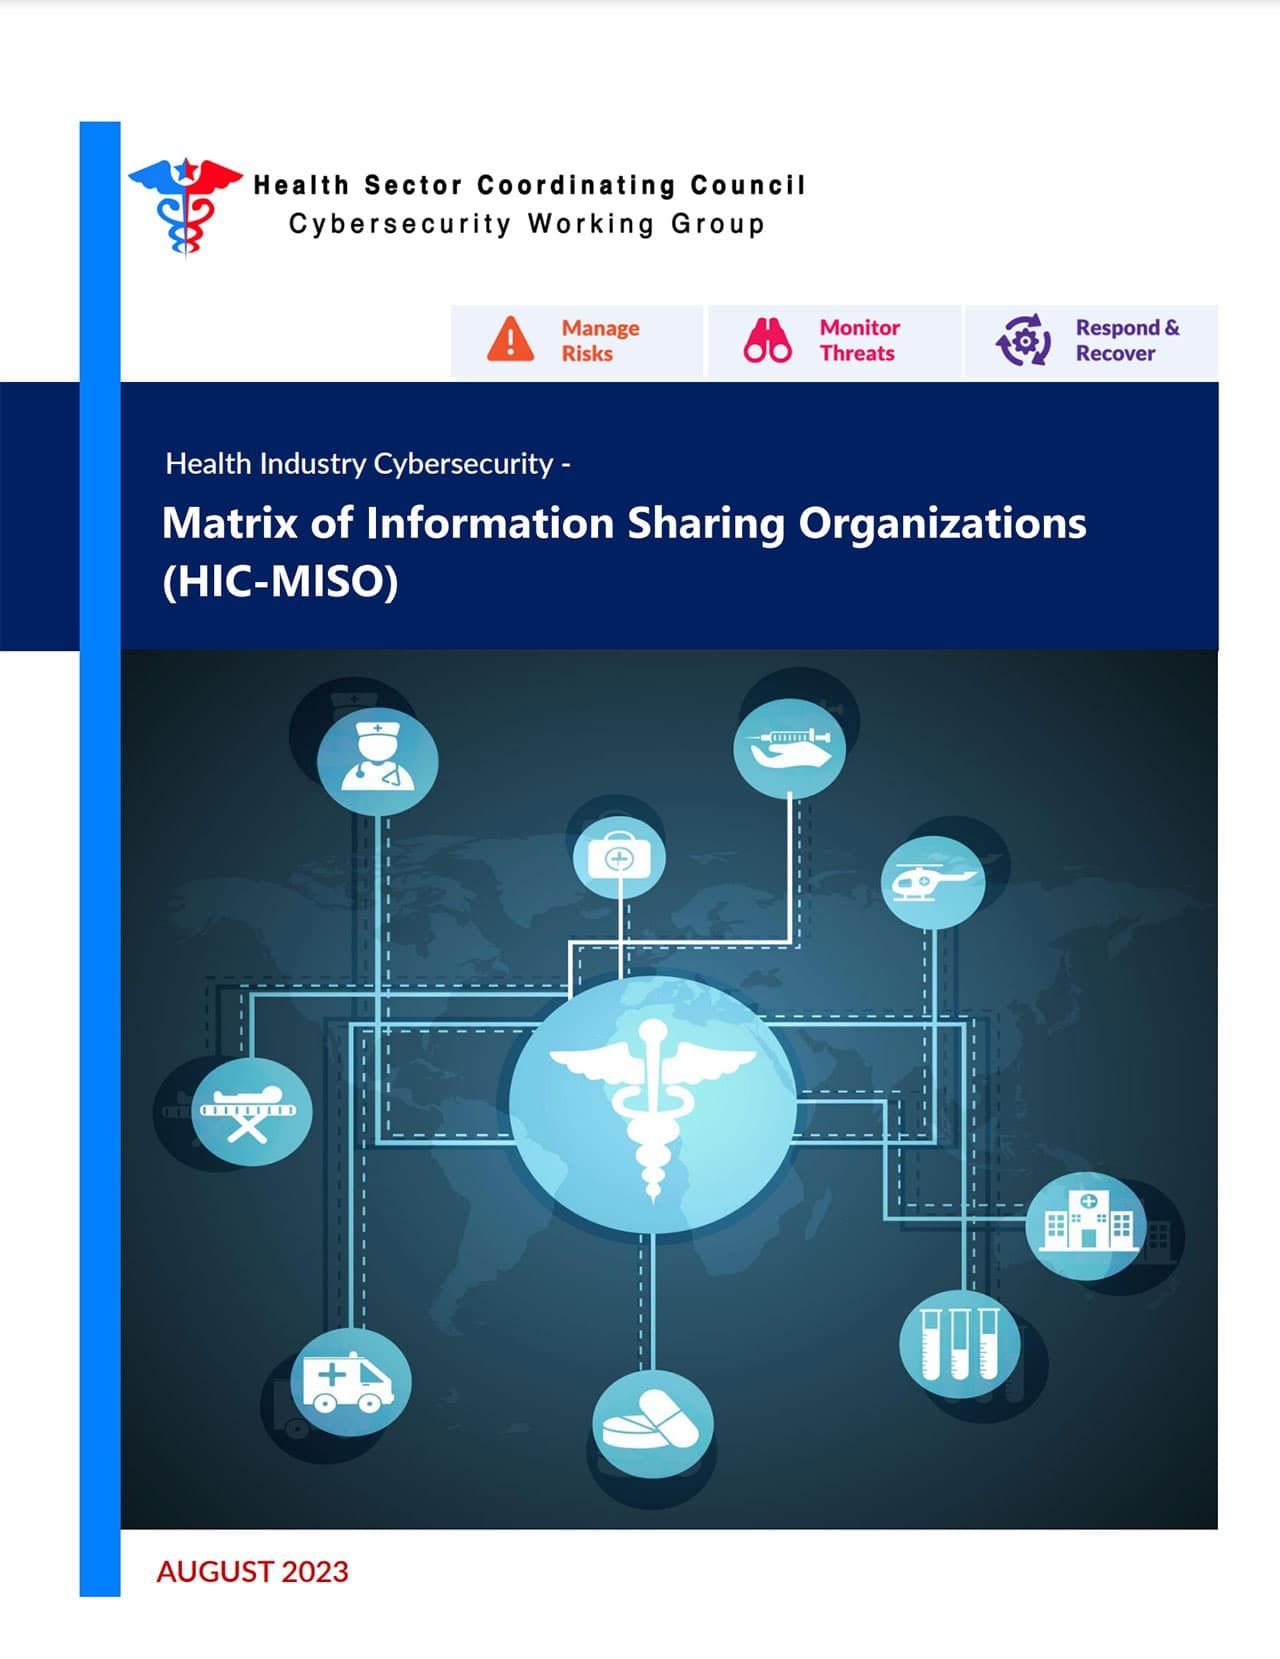 Health Industry Cybersecurity – Matrix of Information Sharing Organizations (HIC-MISO)